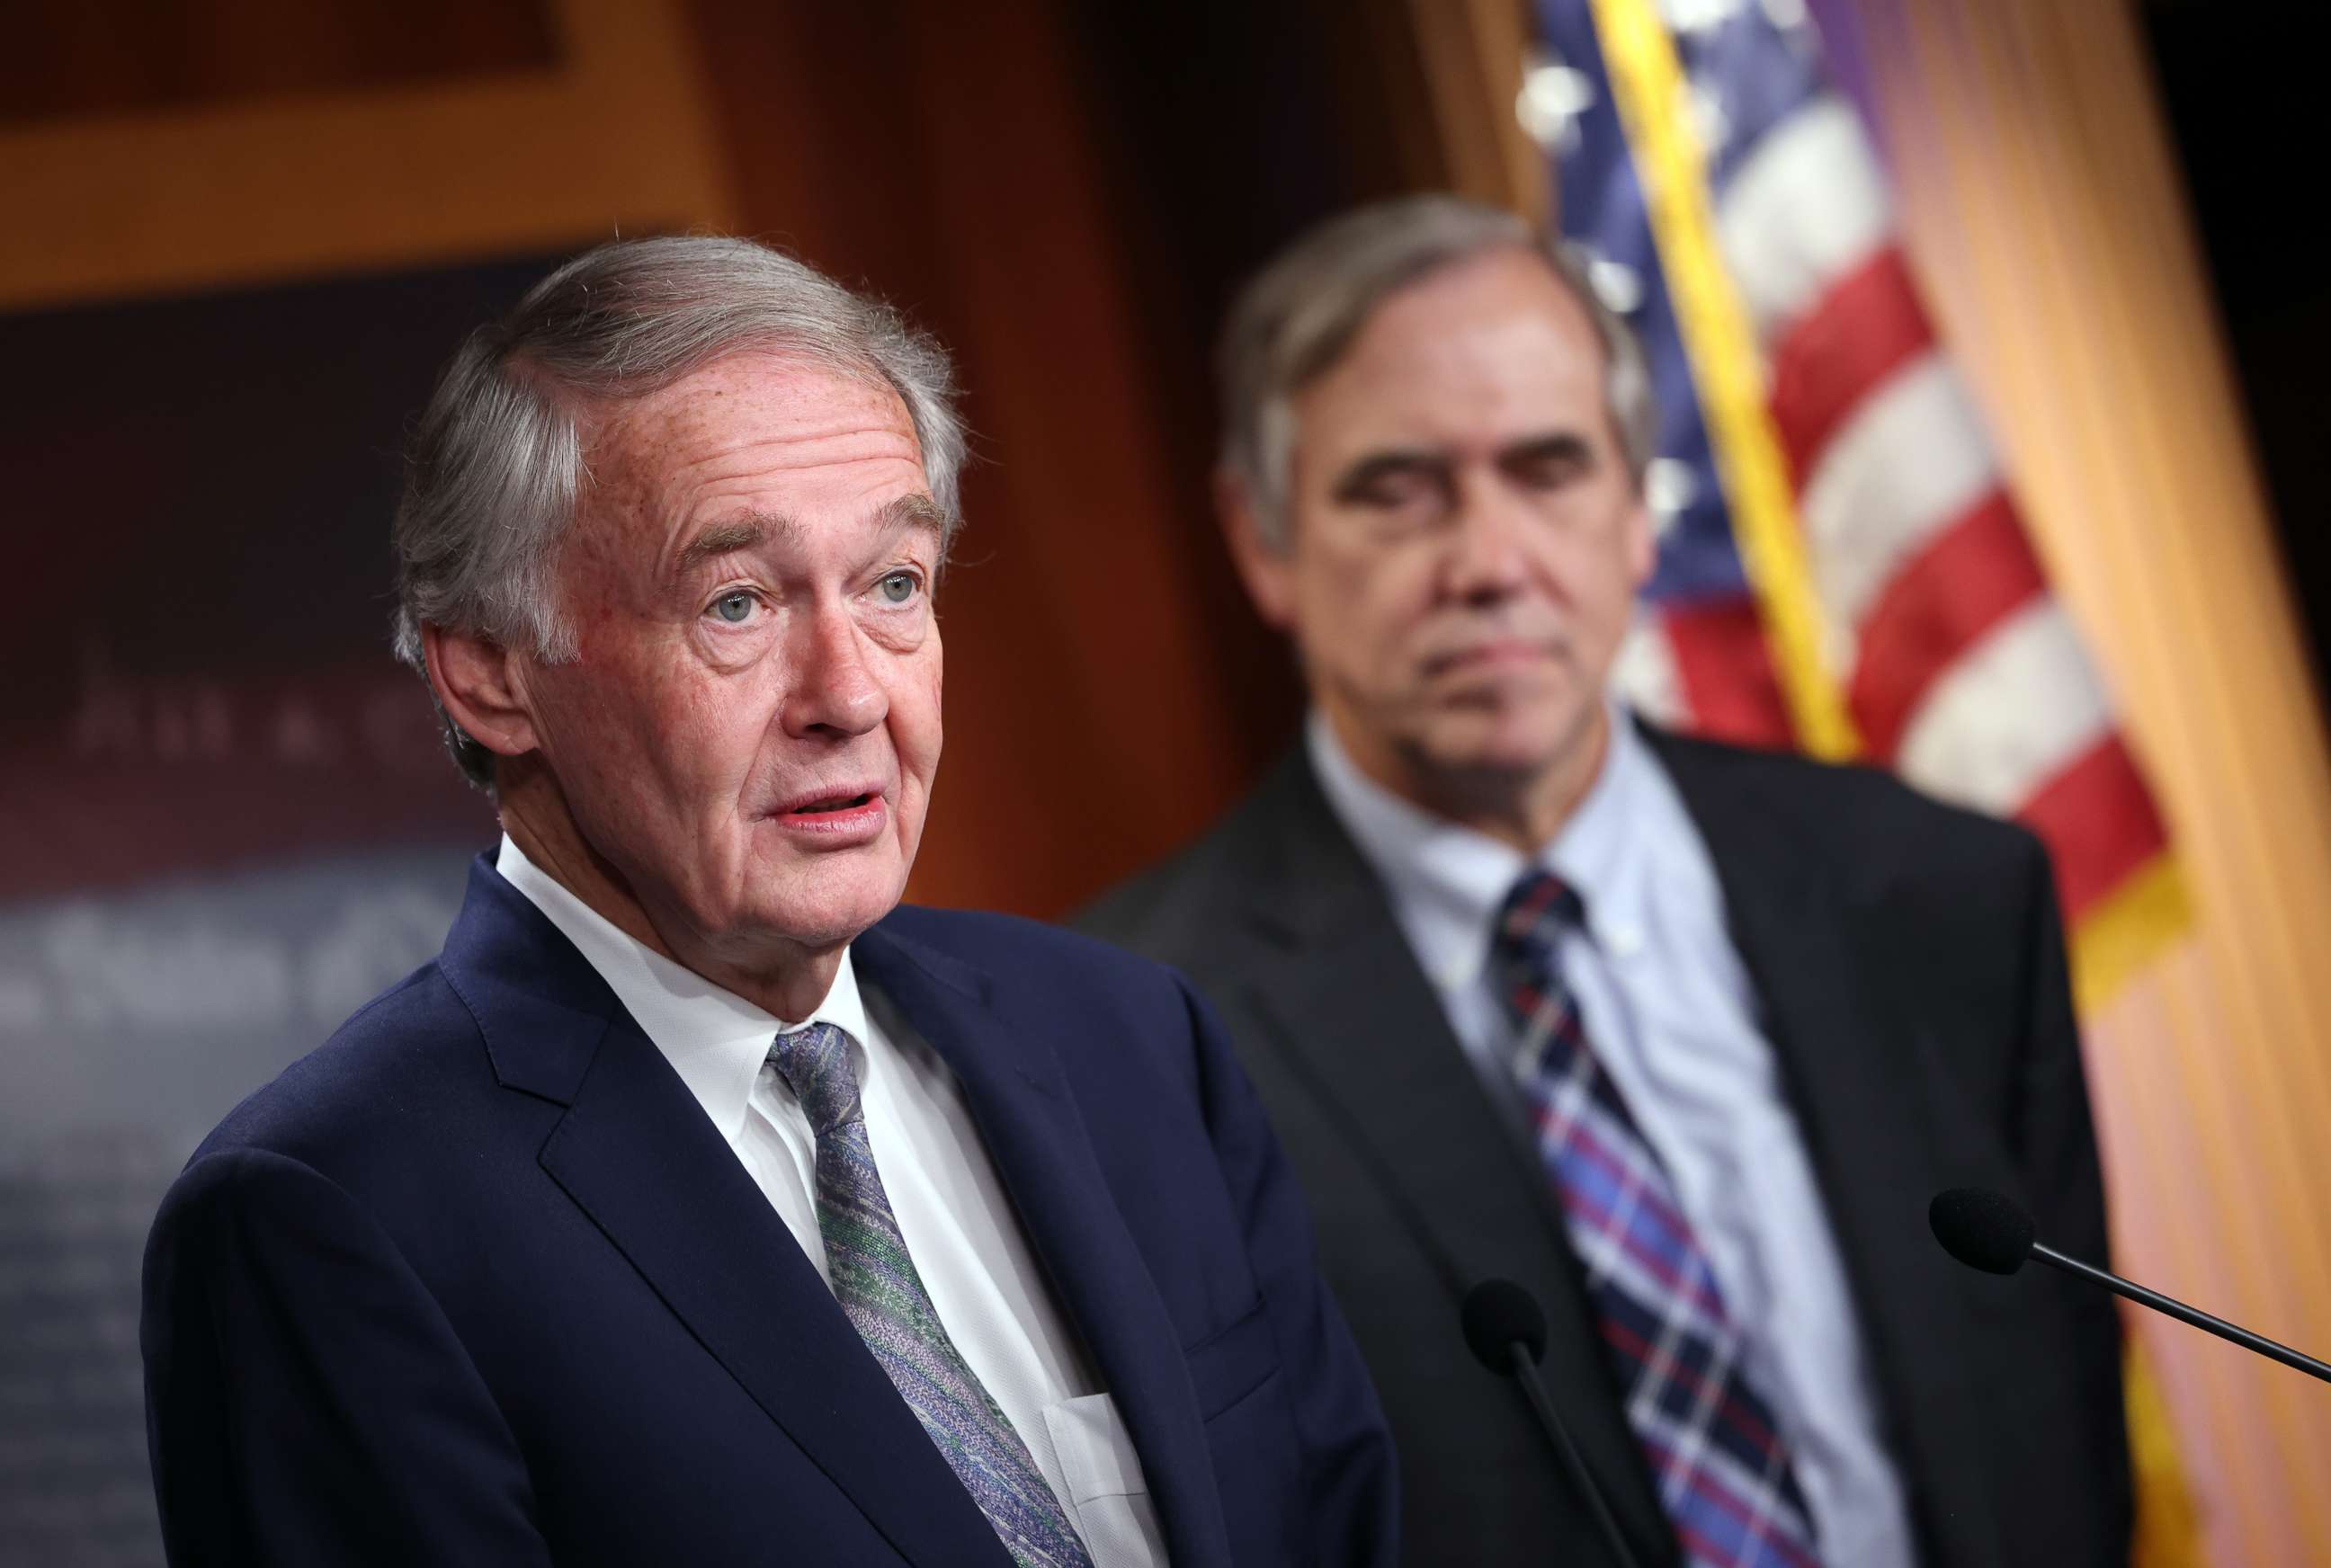 PHOTO: Sen. Ed Markey and Sen. Jeff Merkley speak on infrastructure and climate protection at the Capitol, June 15, 2021, in Washington, DC.